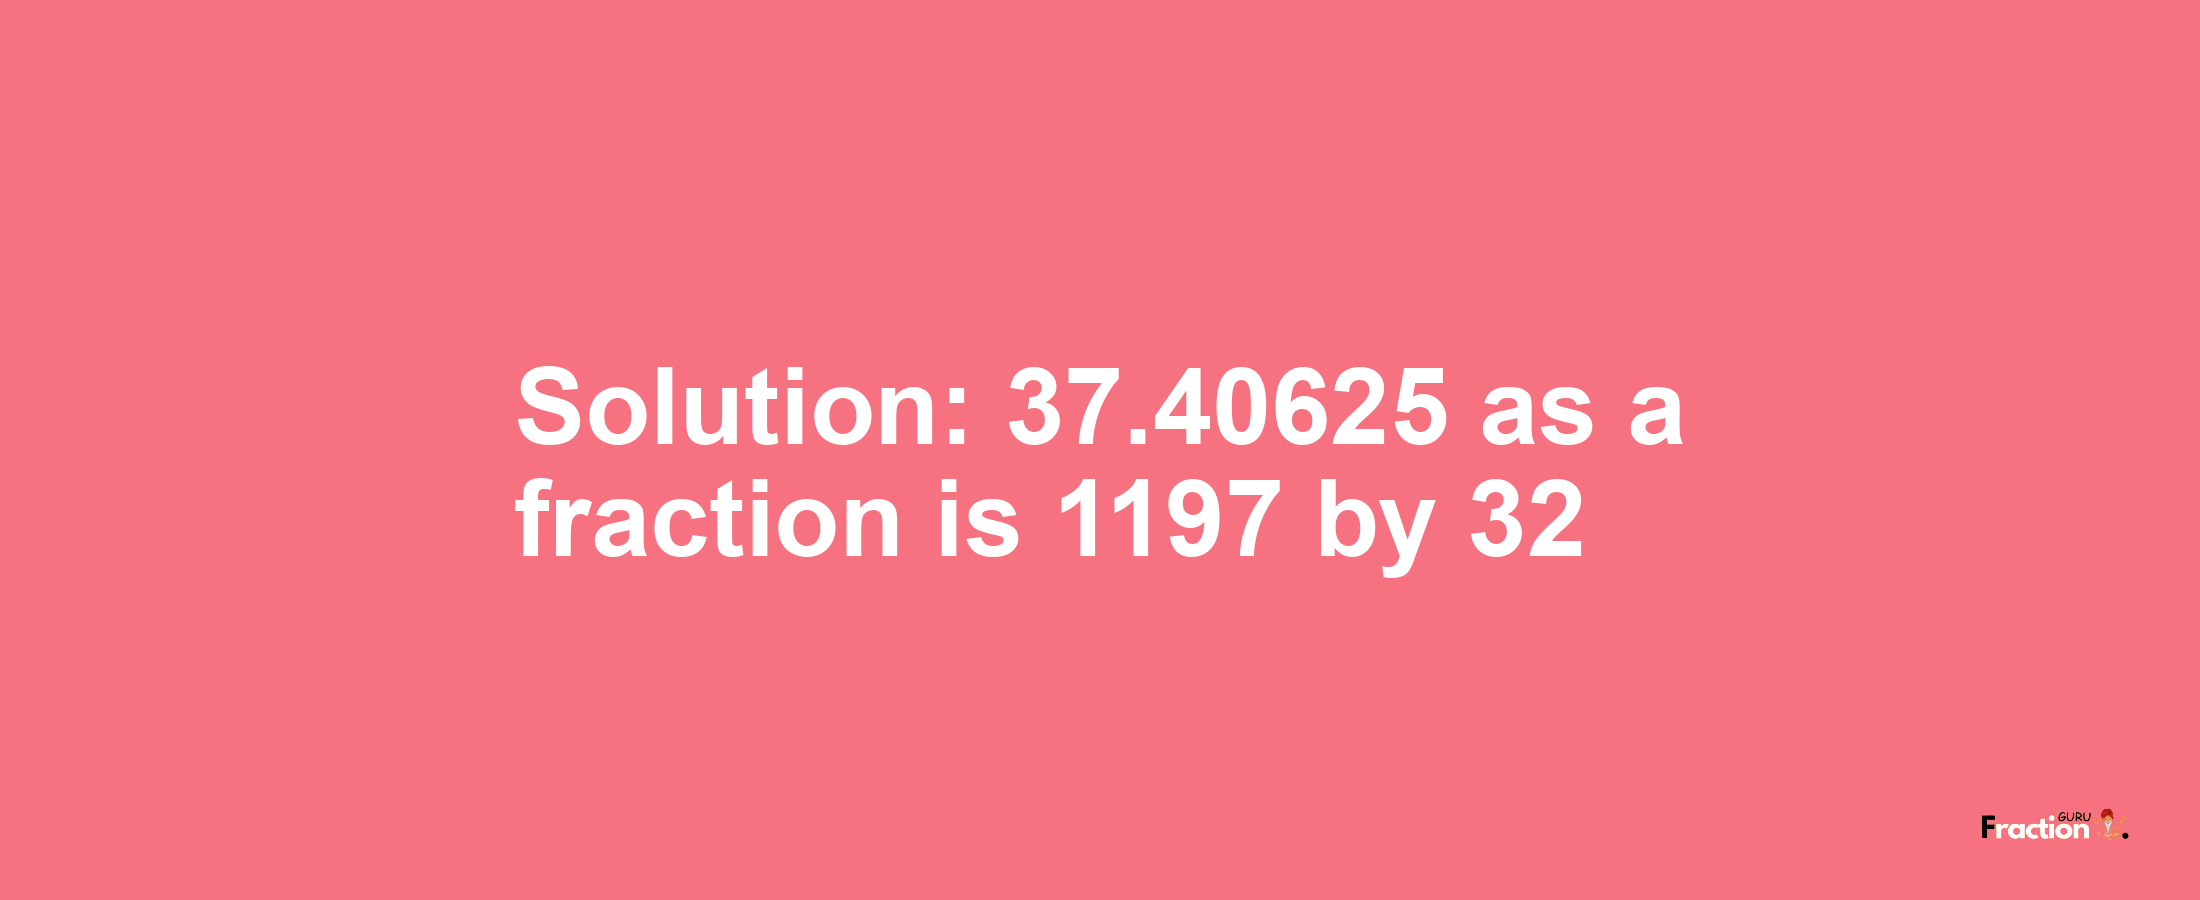 Solution:37.40625 as a fraction is 1197/32